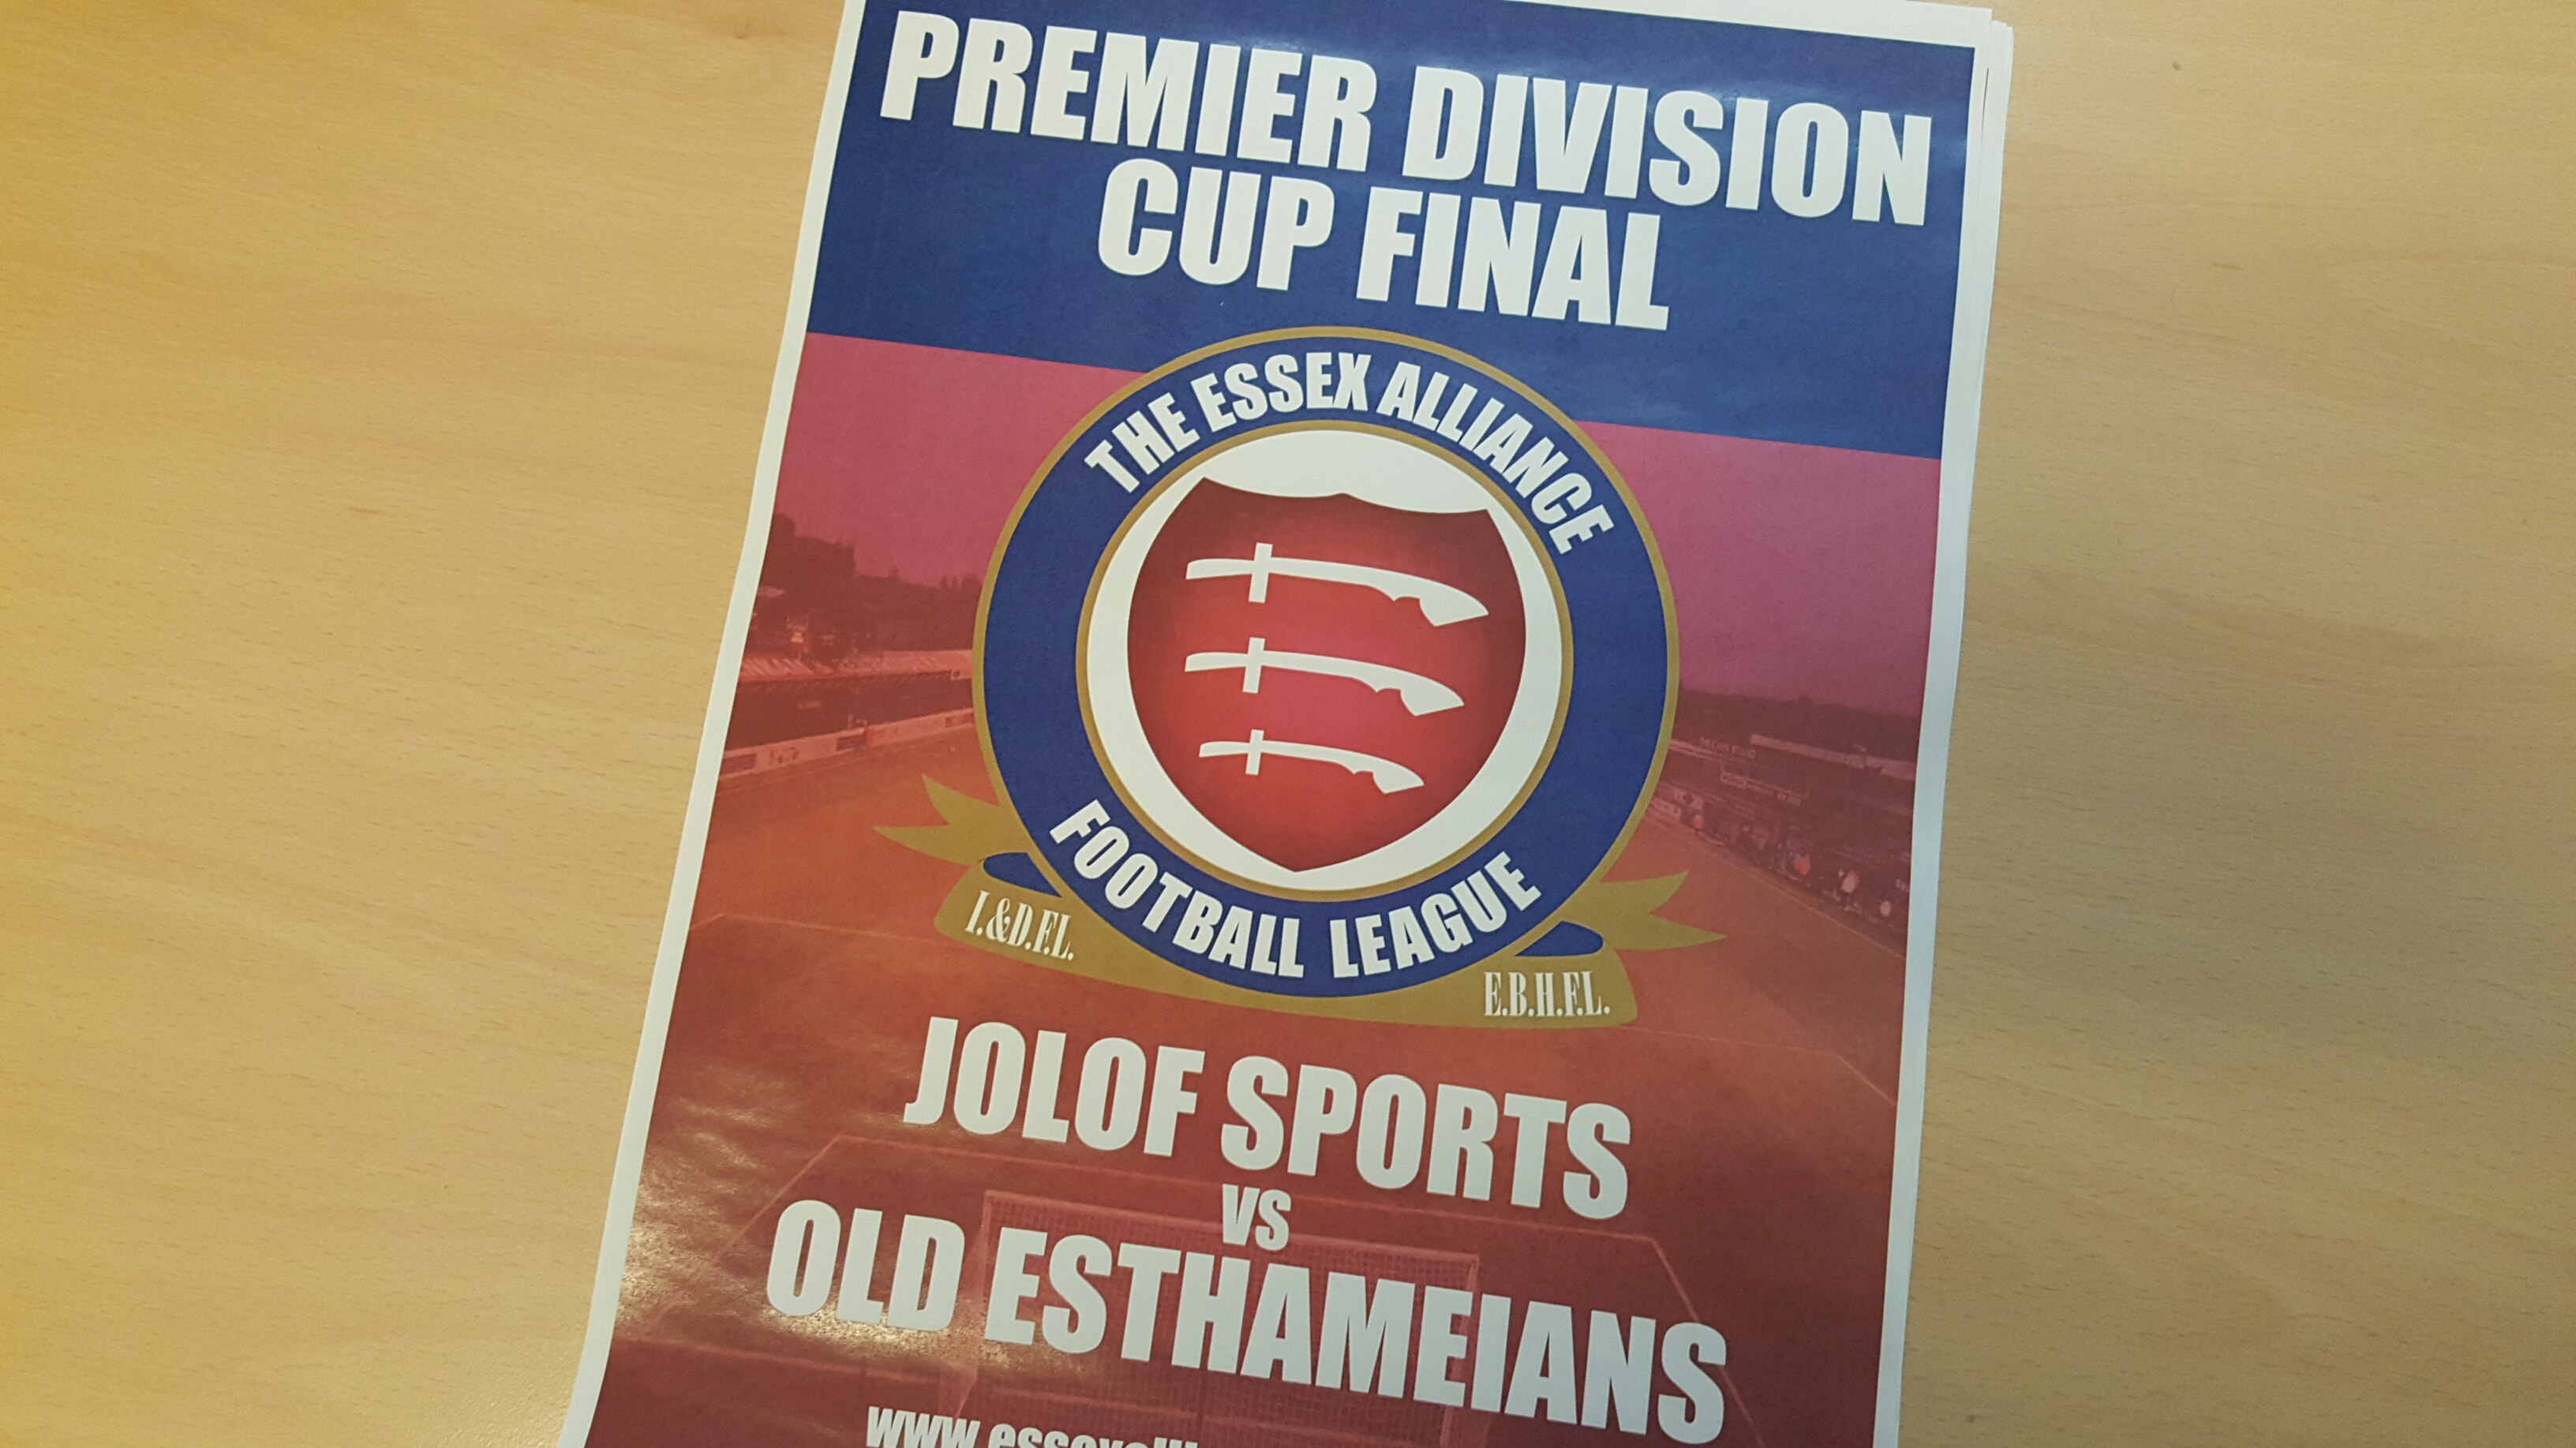 CUP FINAL PREVIEW: Jolof Sports face Old Esthameians in season-closing Premier Division Cup Final